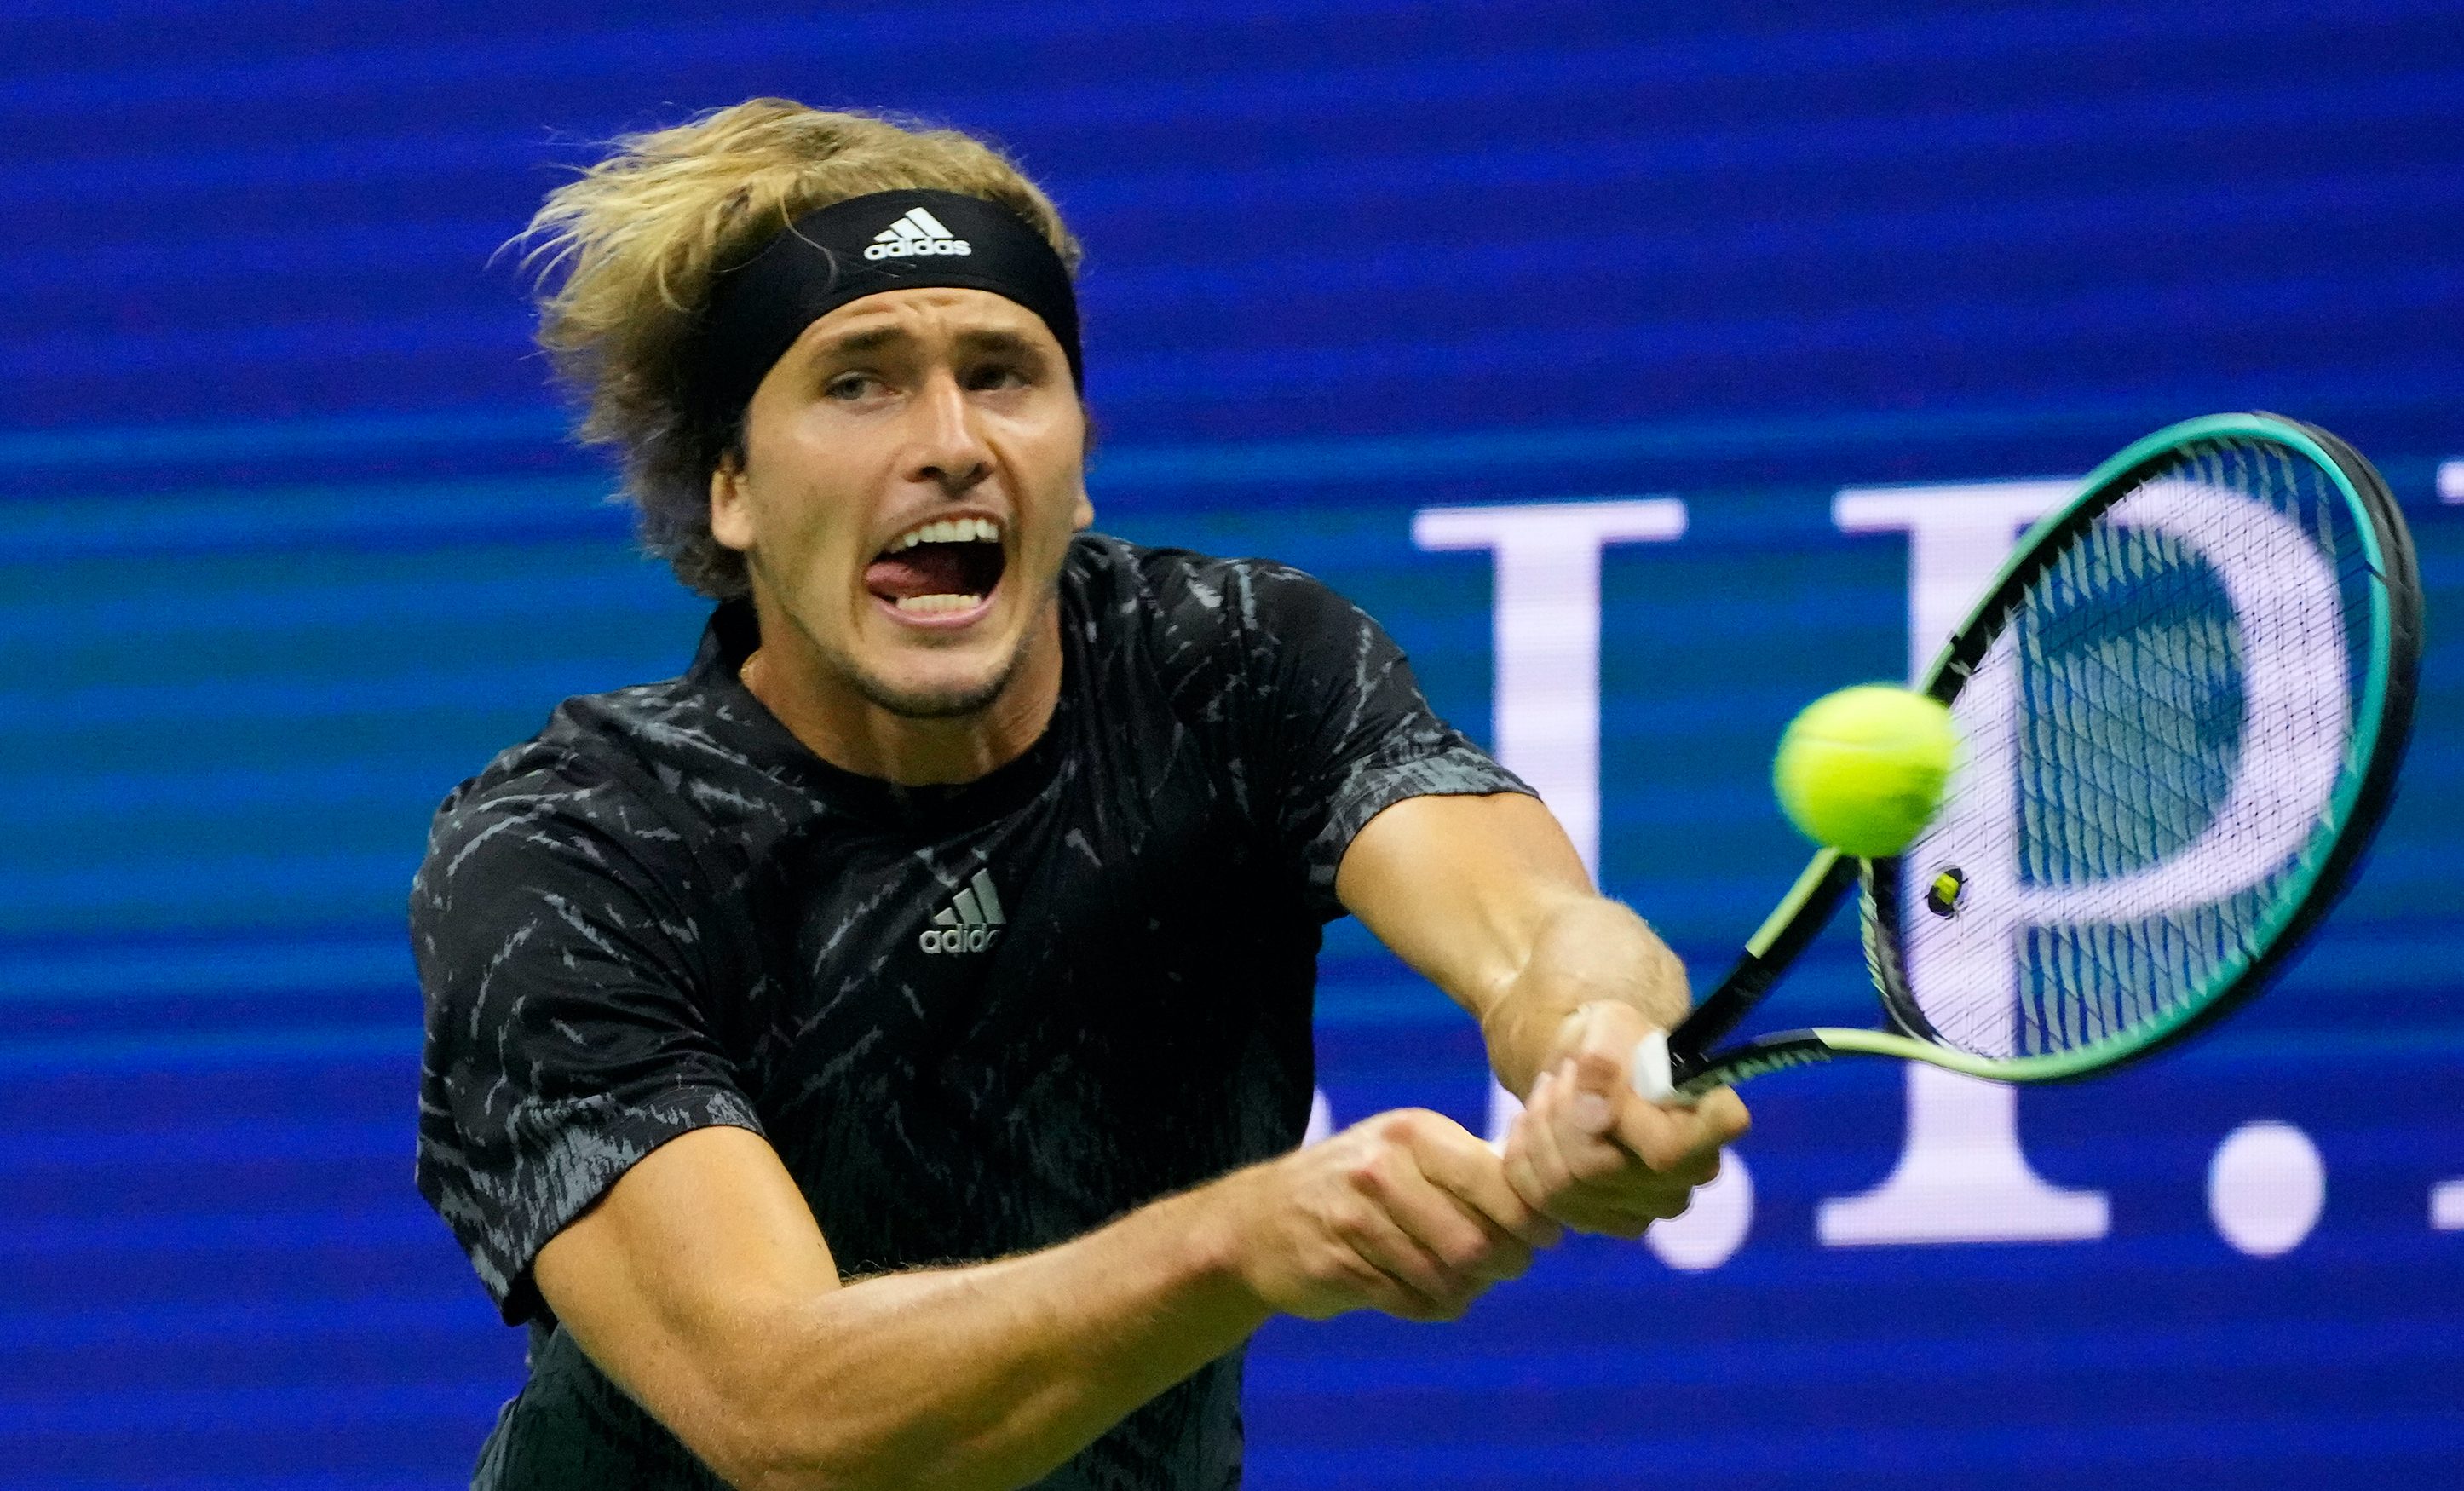 Zverev advances to fourth round after Sock retires